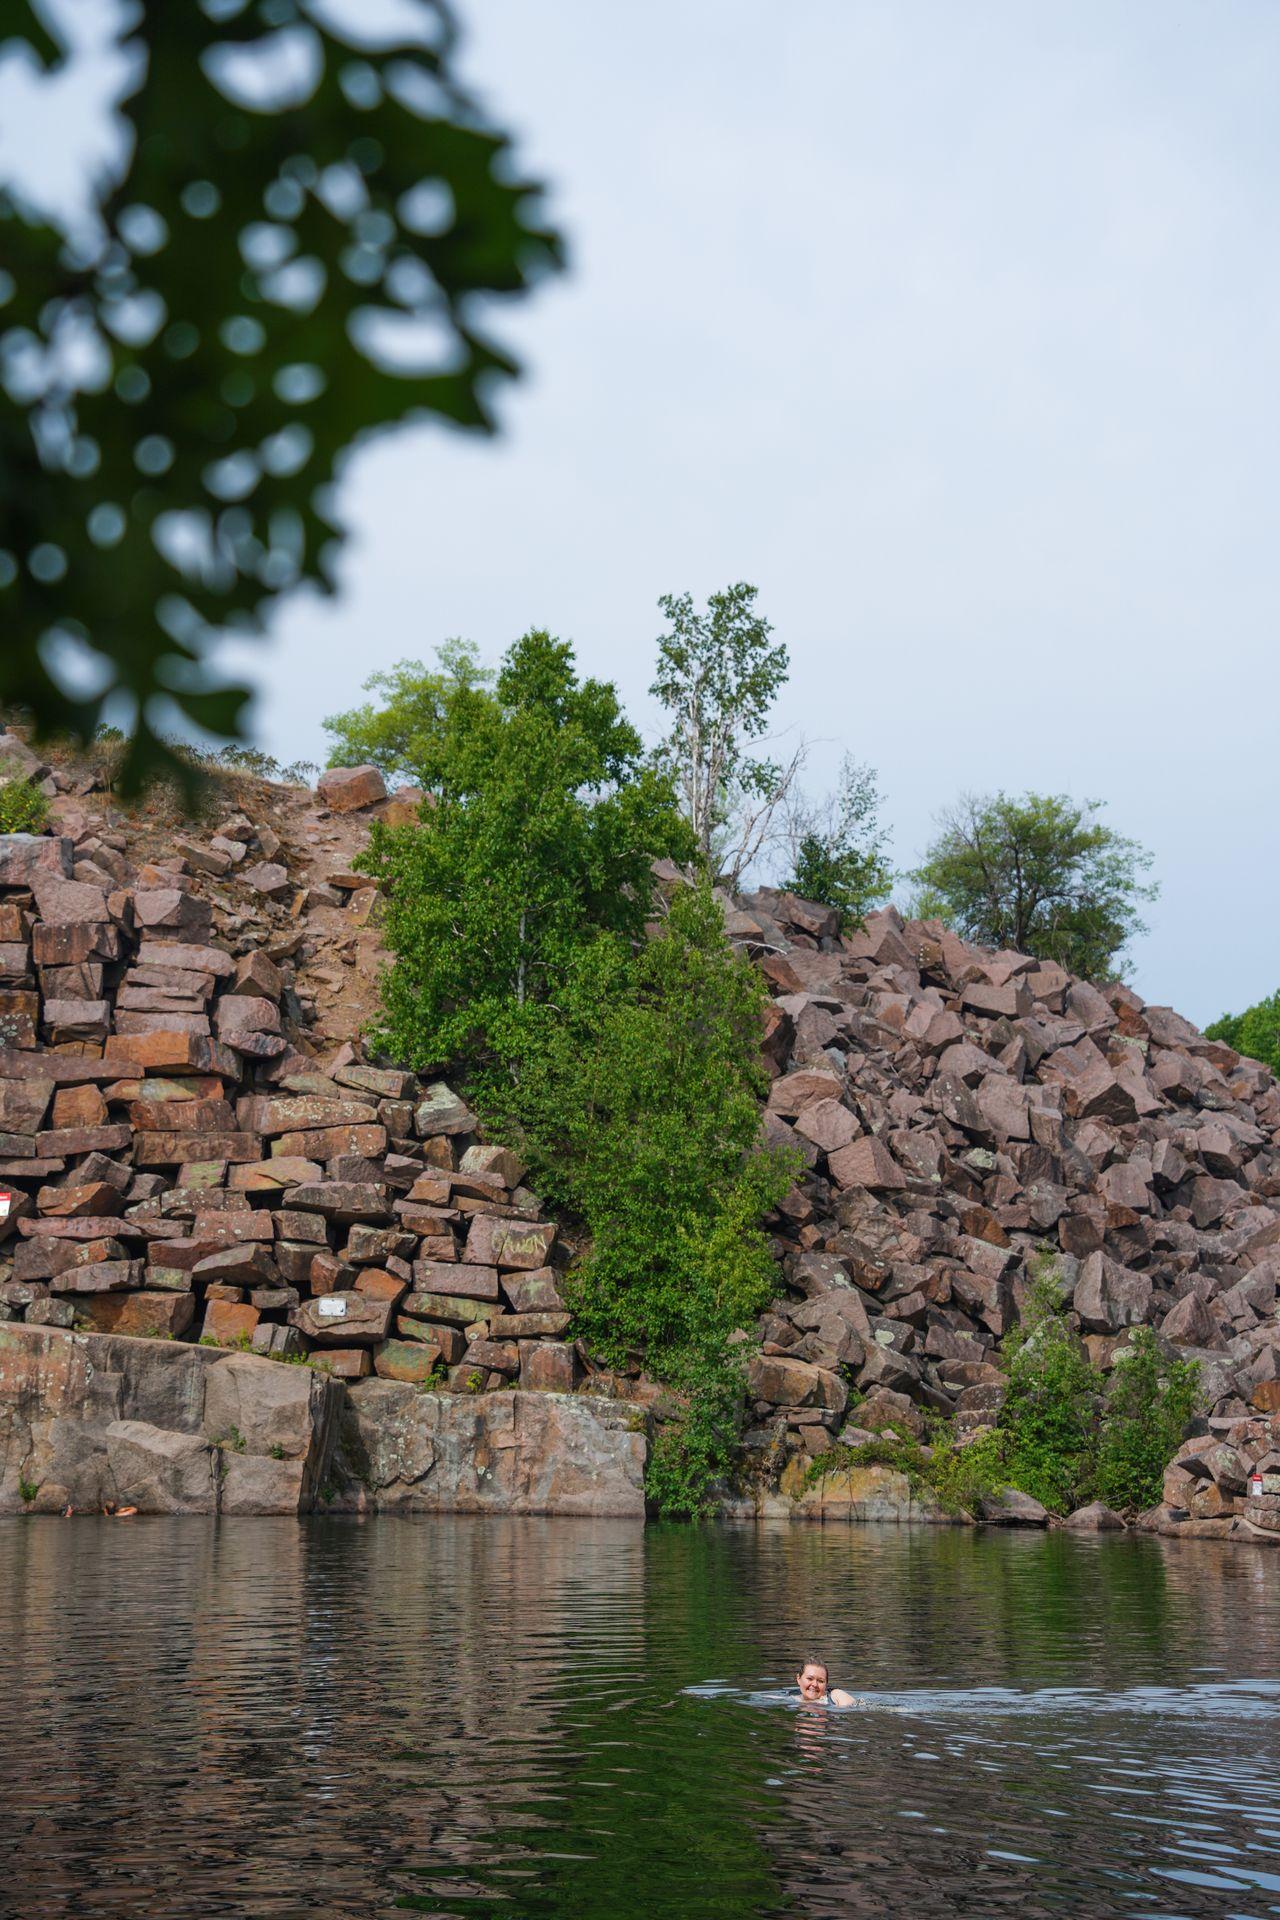 A large piles of quarry rocks next to a pool of water.